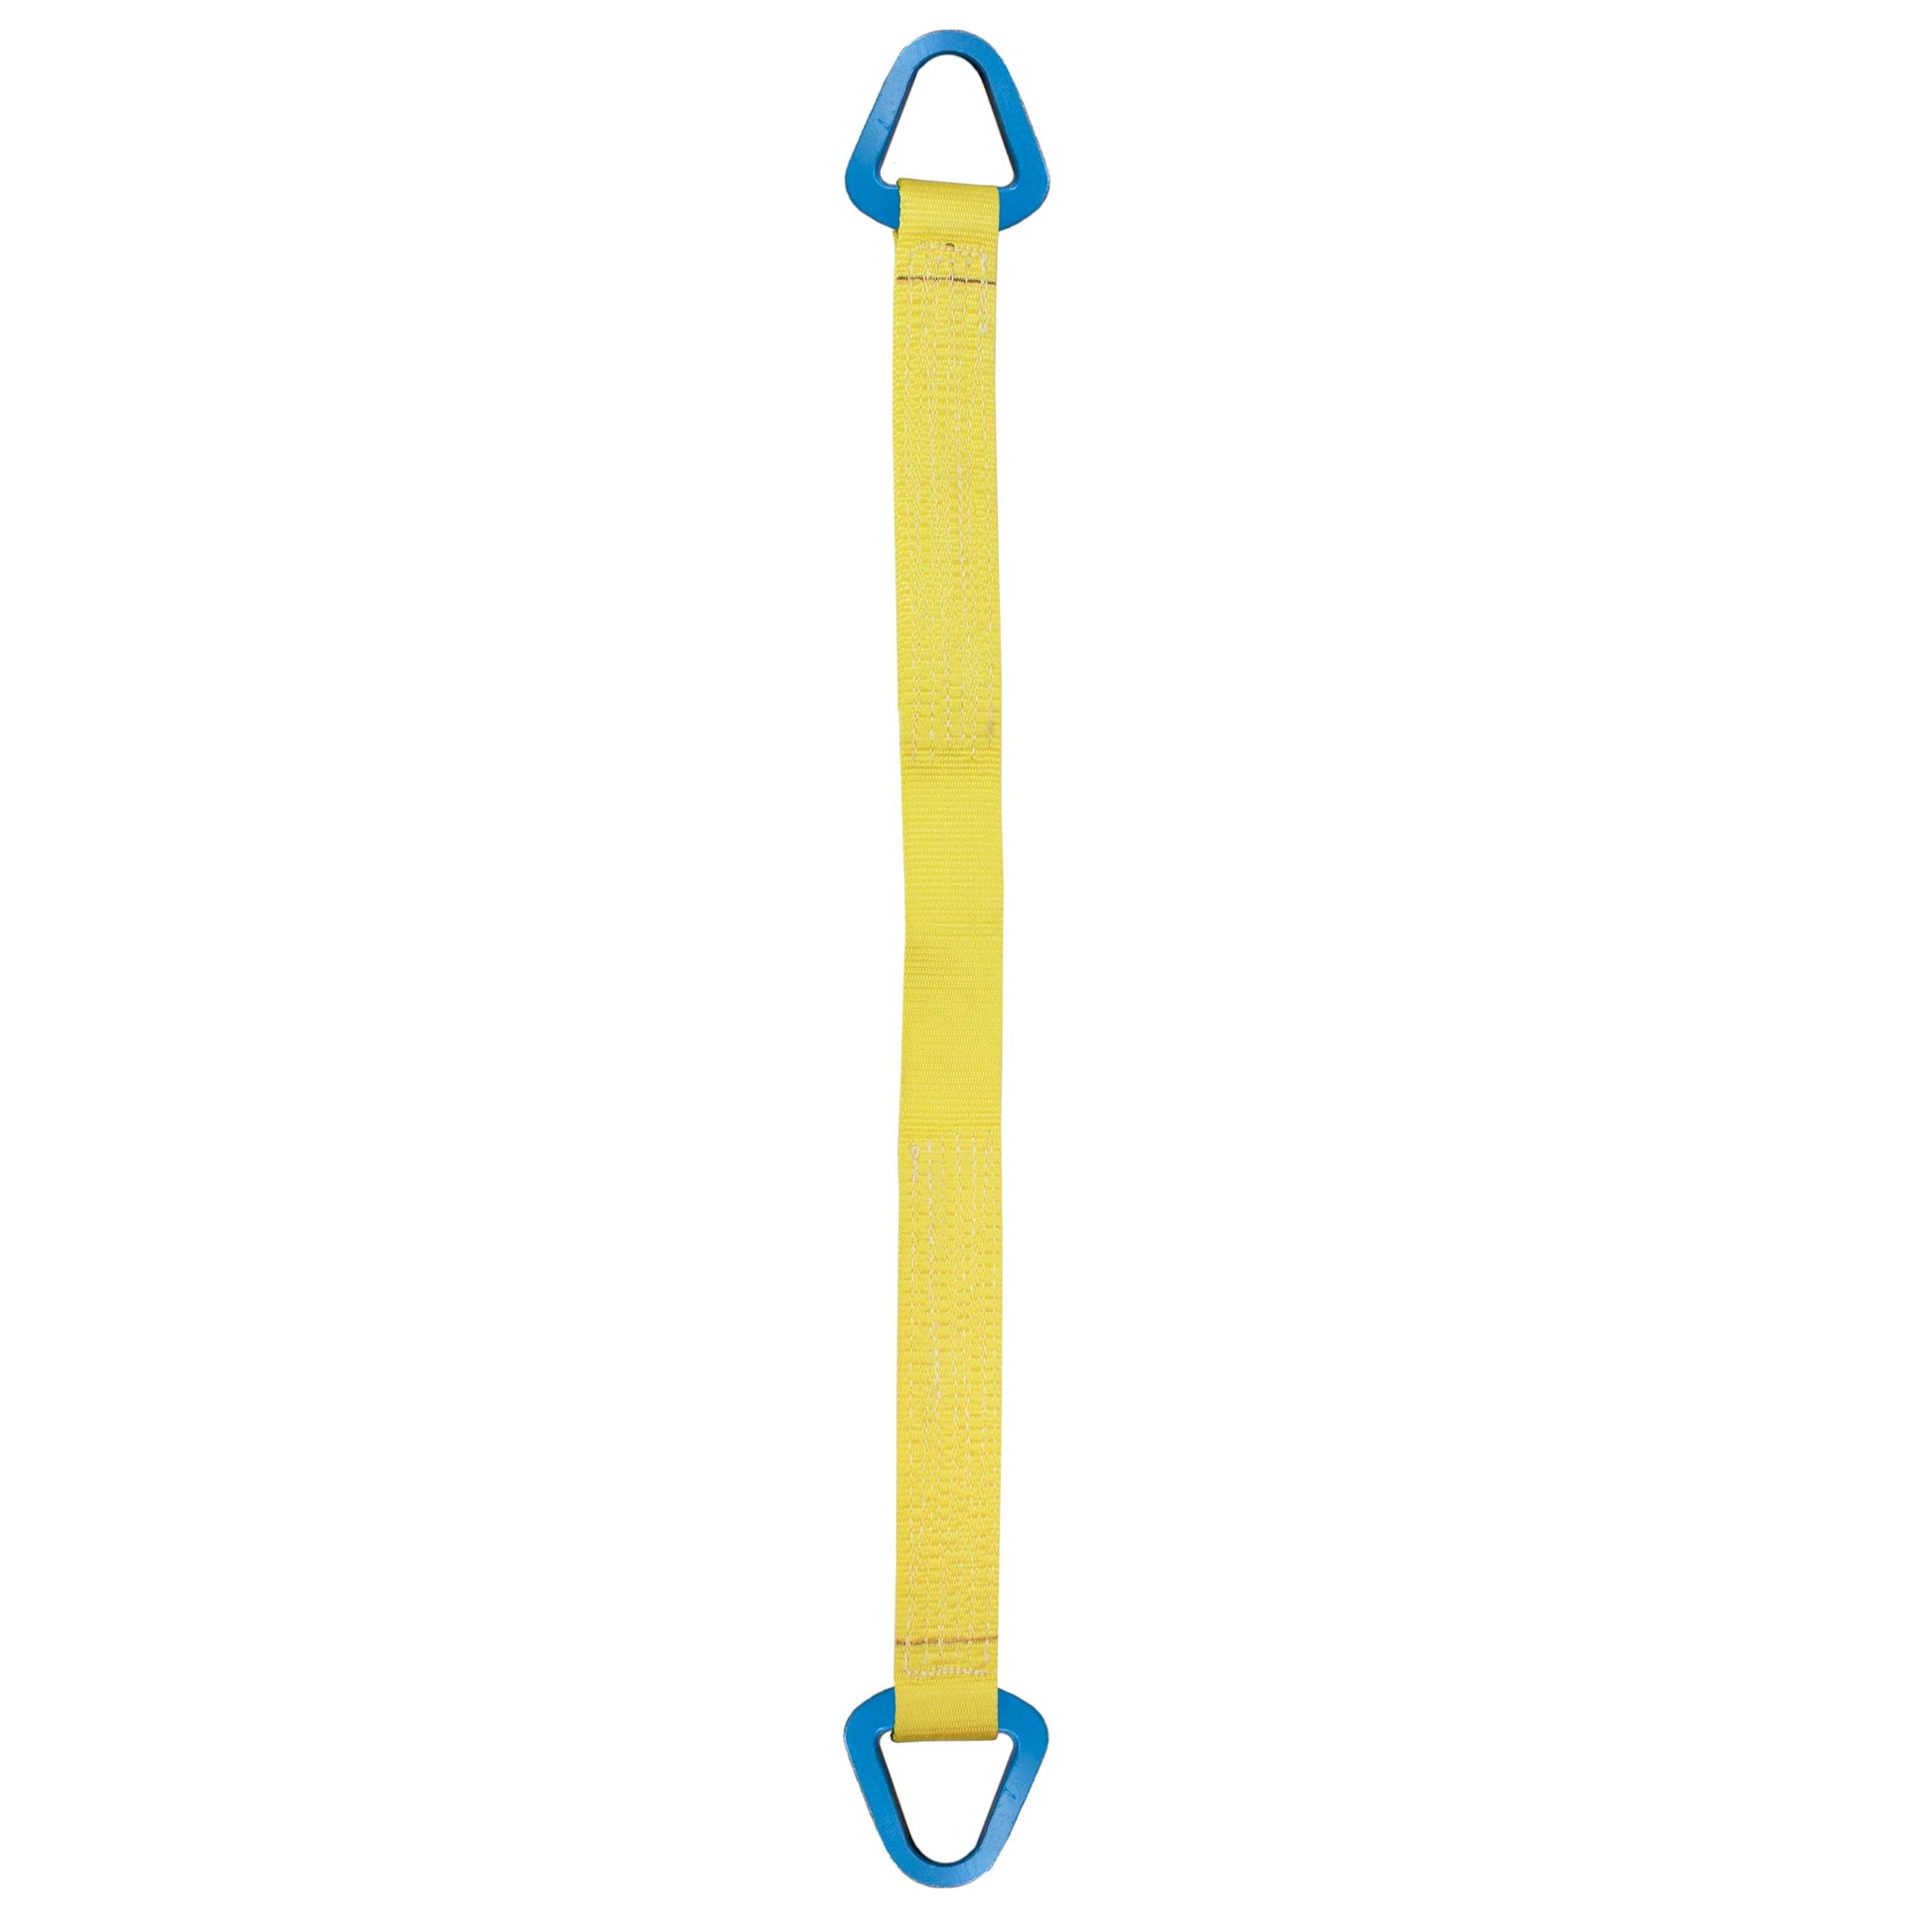 Nylon Lifting Sling Triangle 8 inch x 20 foot 1ply image 1 of 2